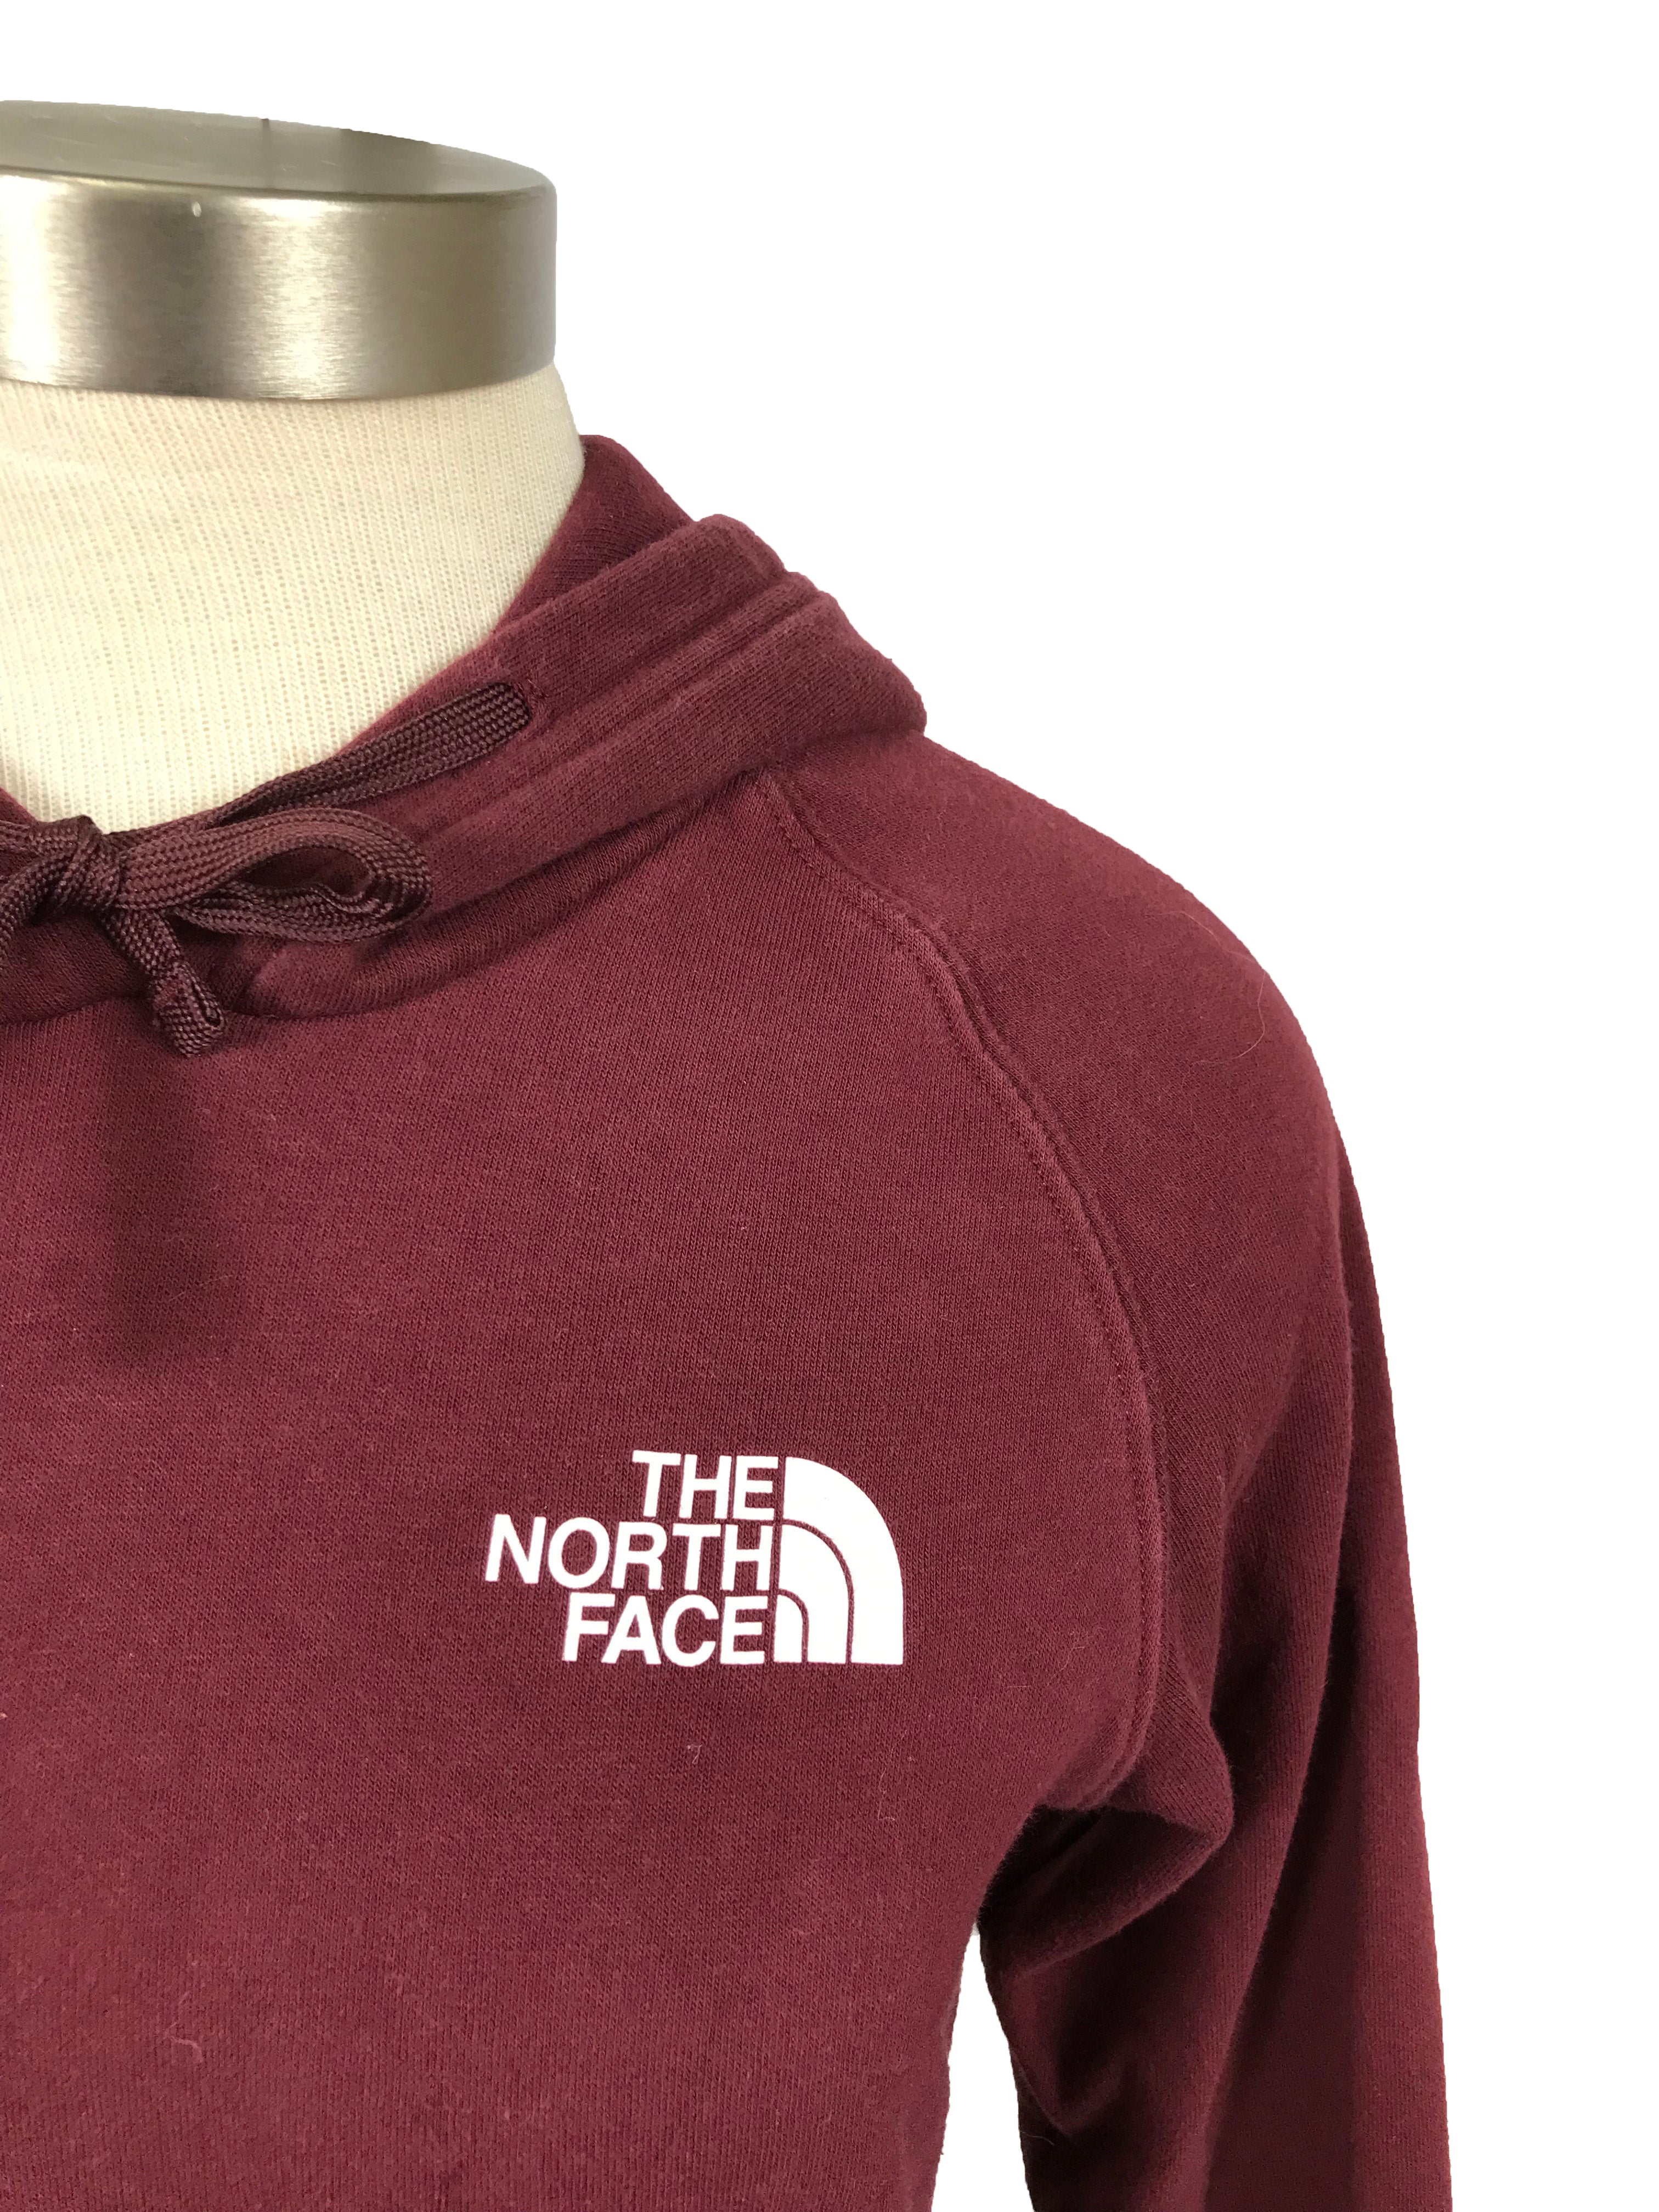 The North Face Burgundy Hoodie Women's Size S